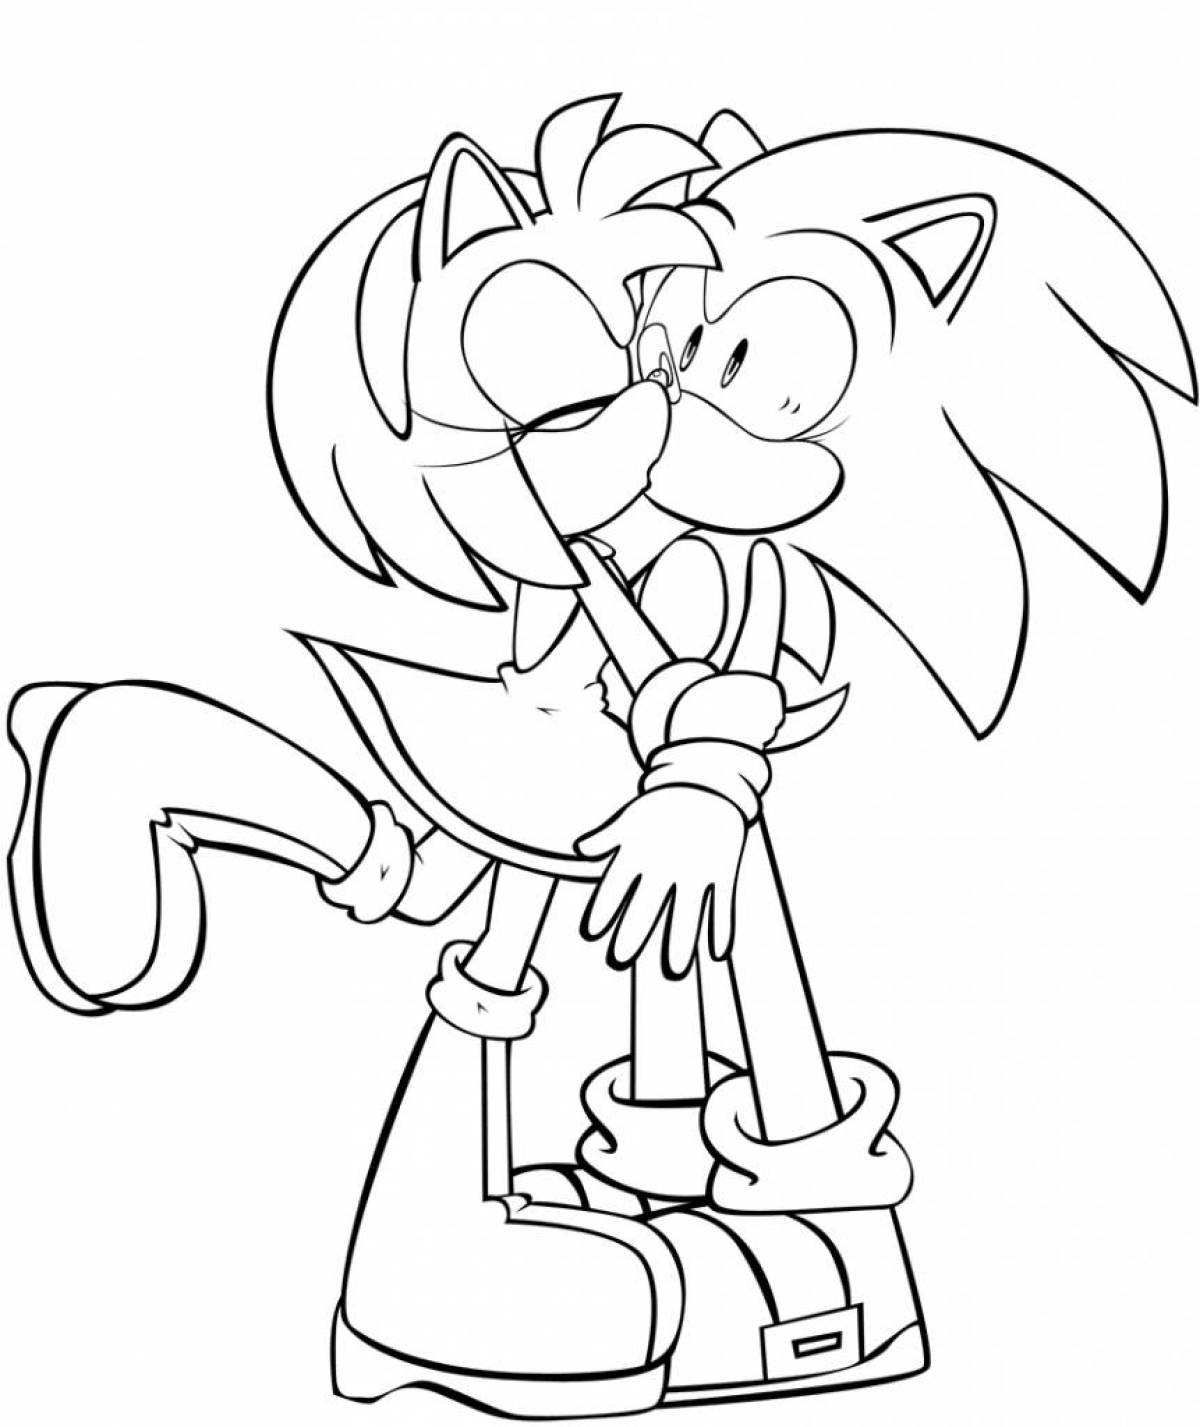 Coloring amy rose filled with colors